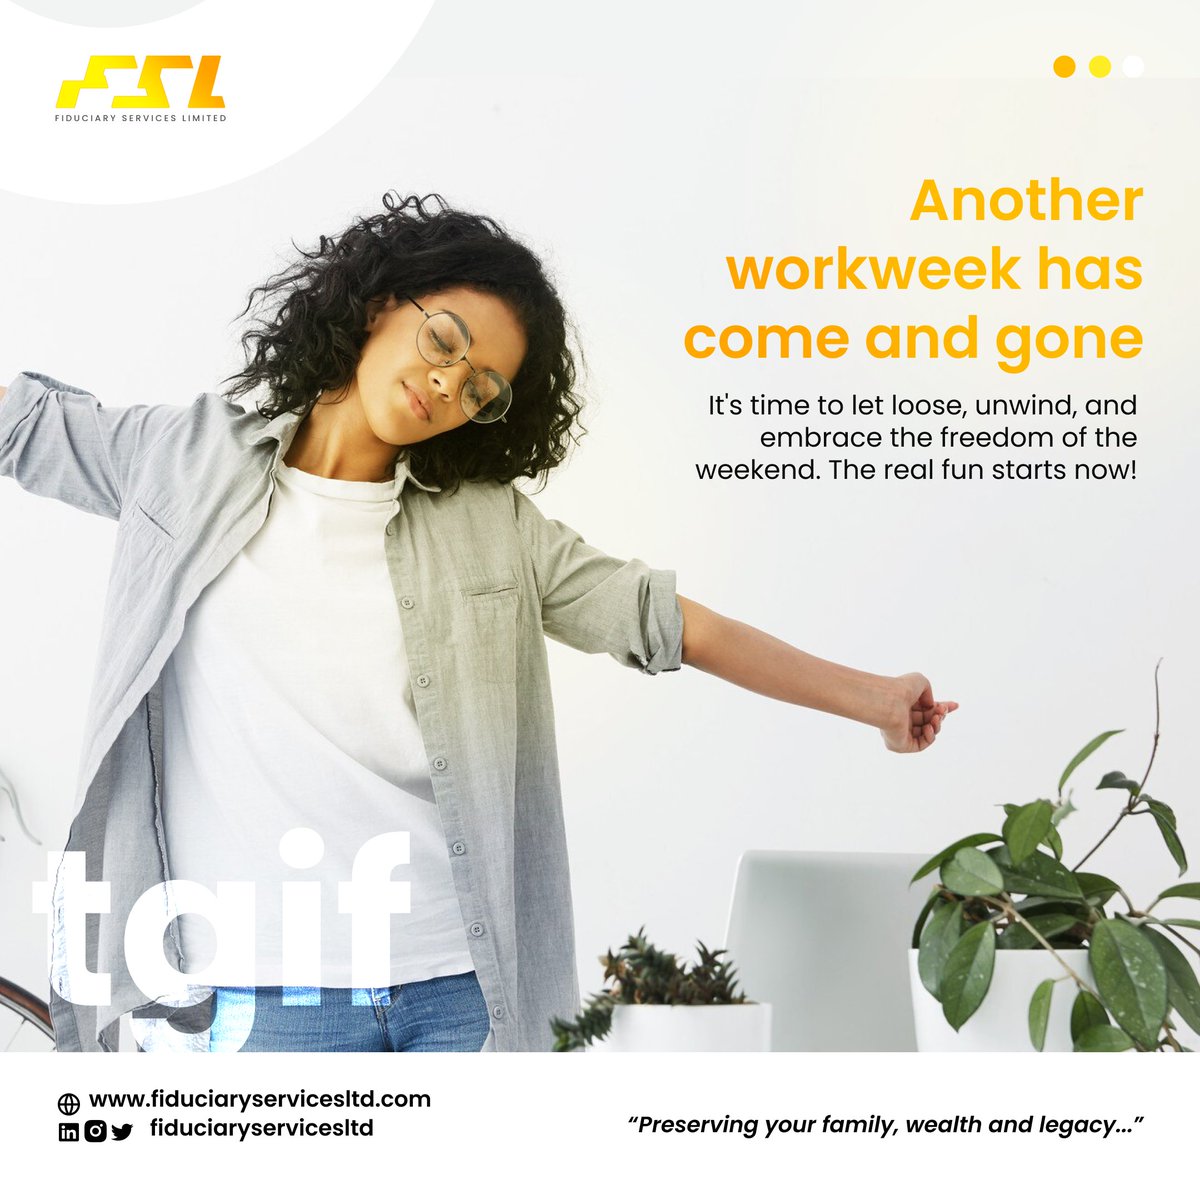 Celebrate the weekend and share how you plan to make the most of your hard-earned freedom!

#TGIF #WeekendWarriors #FridayFeeling #LifeIsGood #WorkHardPlayHarder #fiduciaryserviceslimited